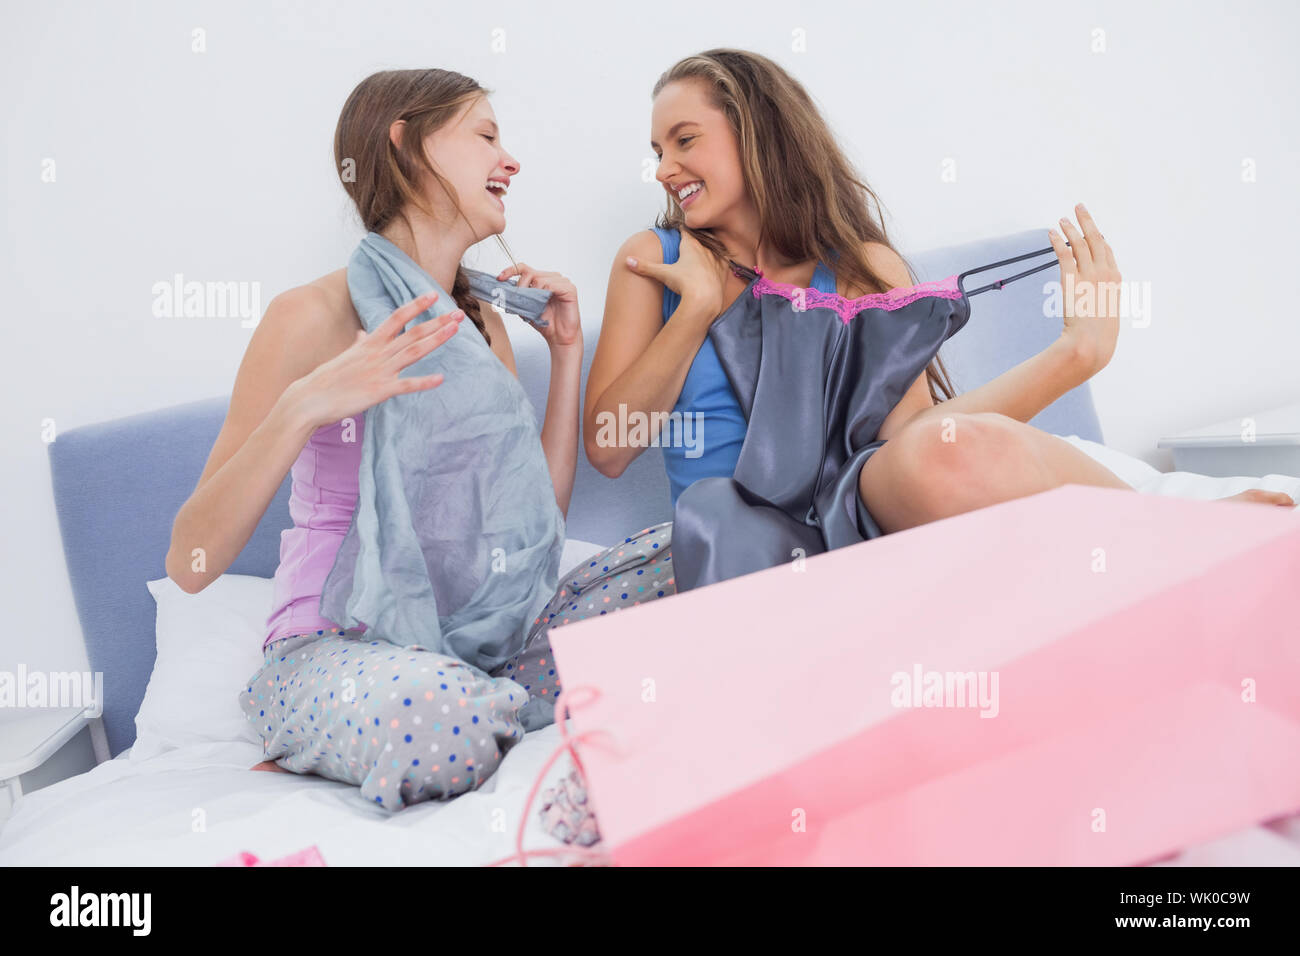 Teen girls sitting on bed after shopping Stock Photo